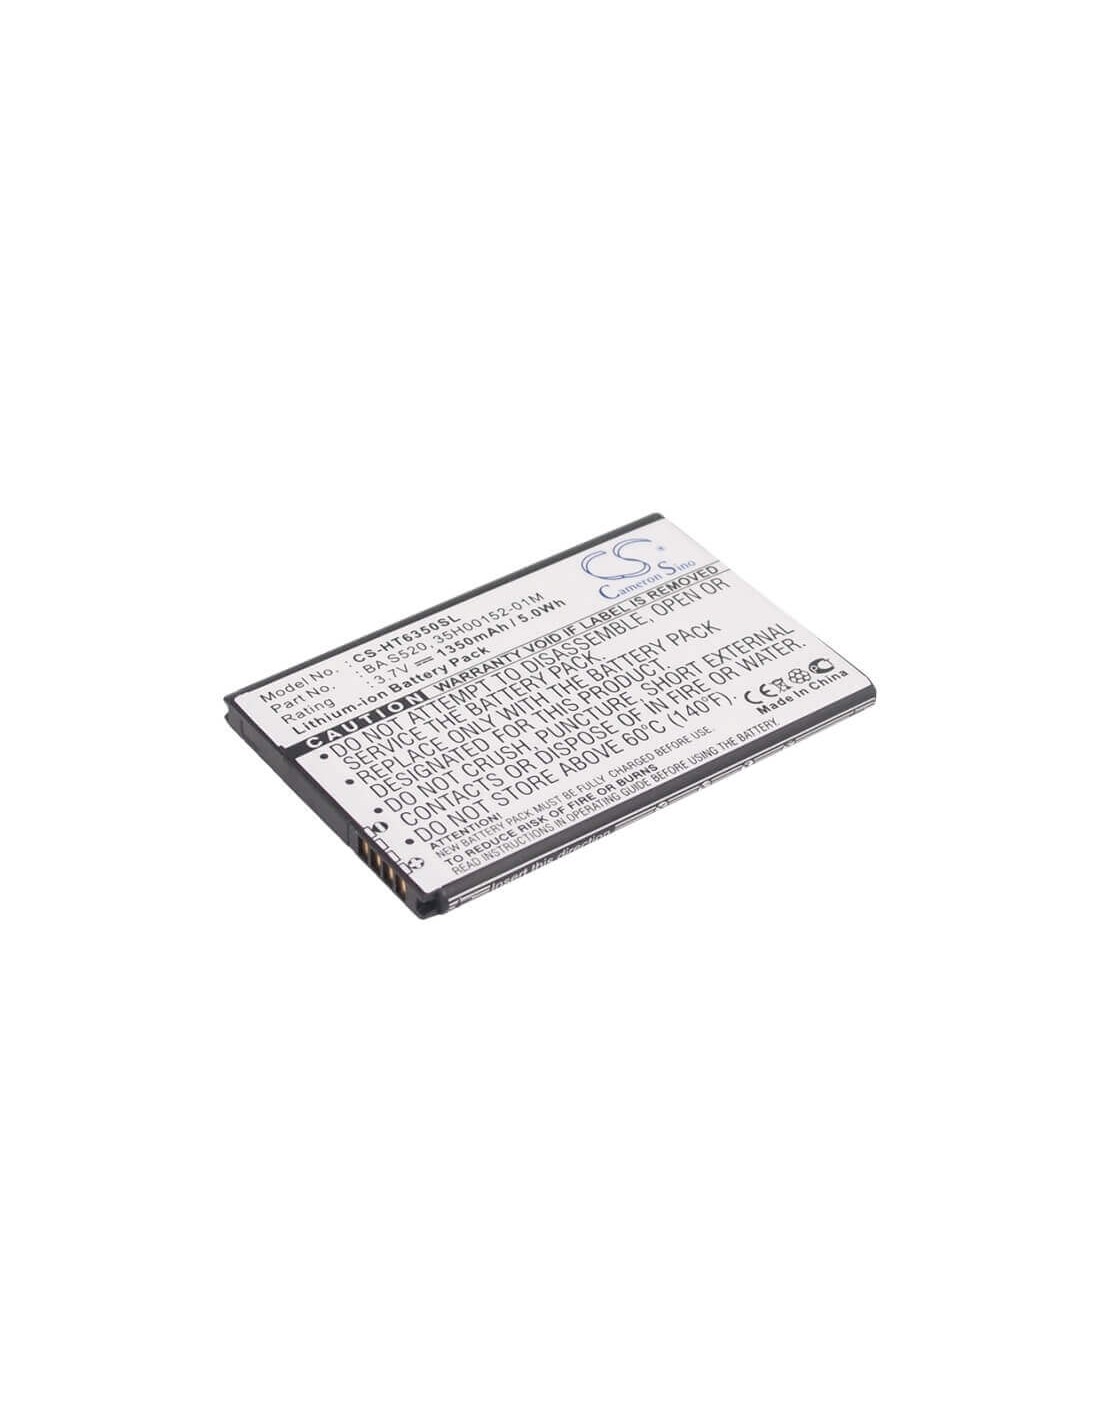 Battery for HTC Droid Incredible 2, Droid Incredible II, ADR6350 3.7V, 1350mAh - 5.00Wh